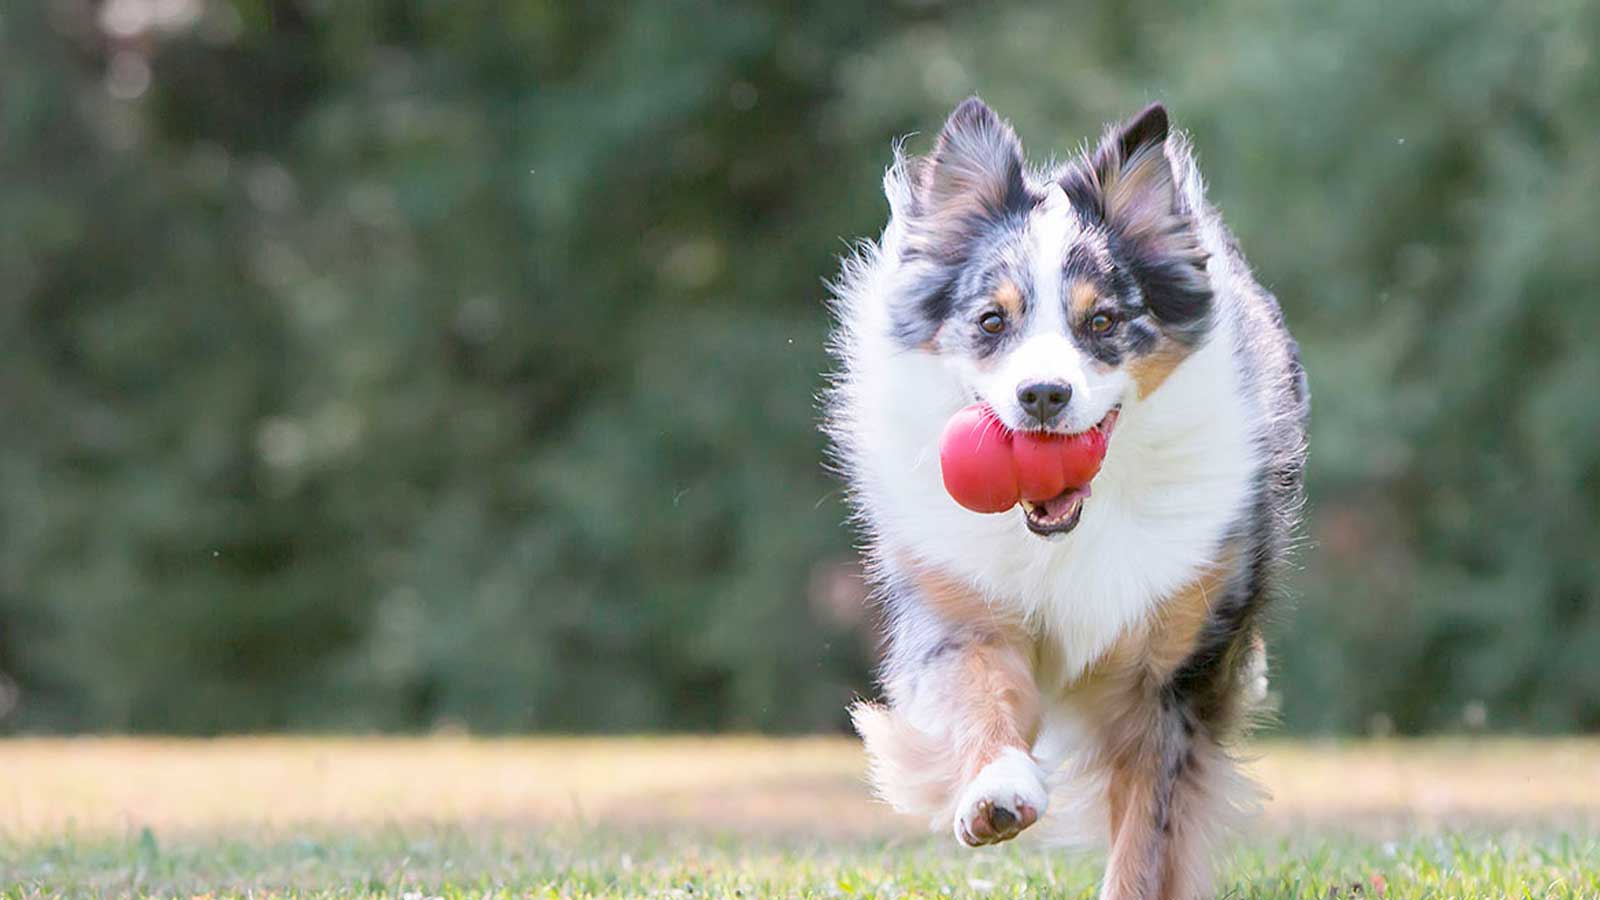 Dog running with a Classic Kong dog toy in it's mouth